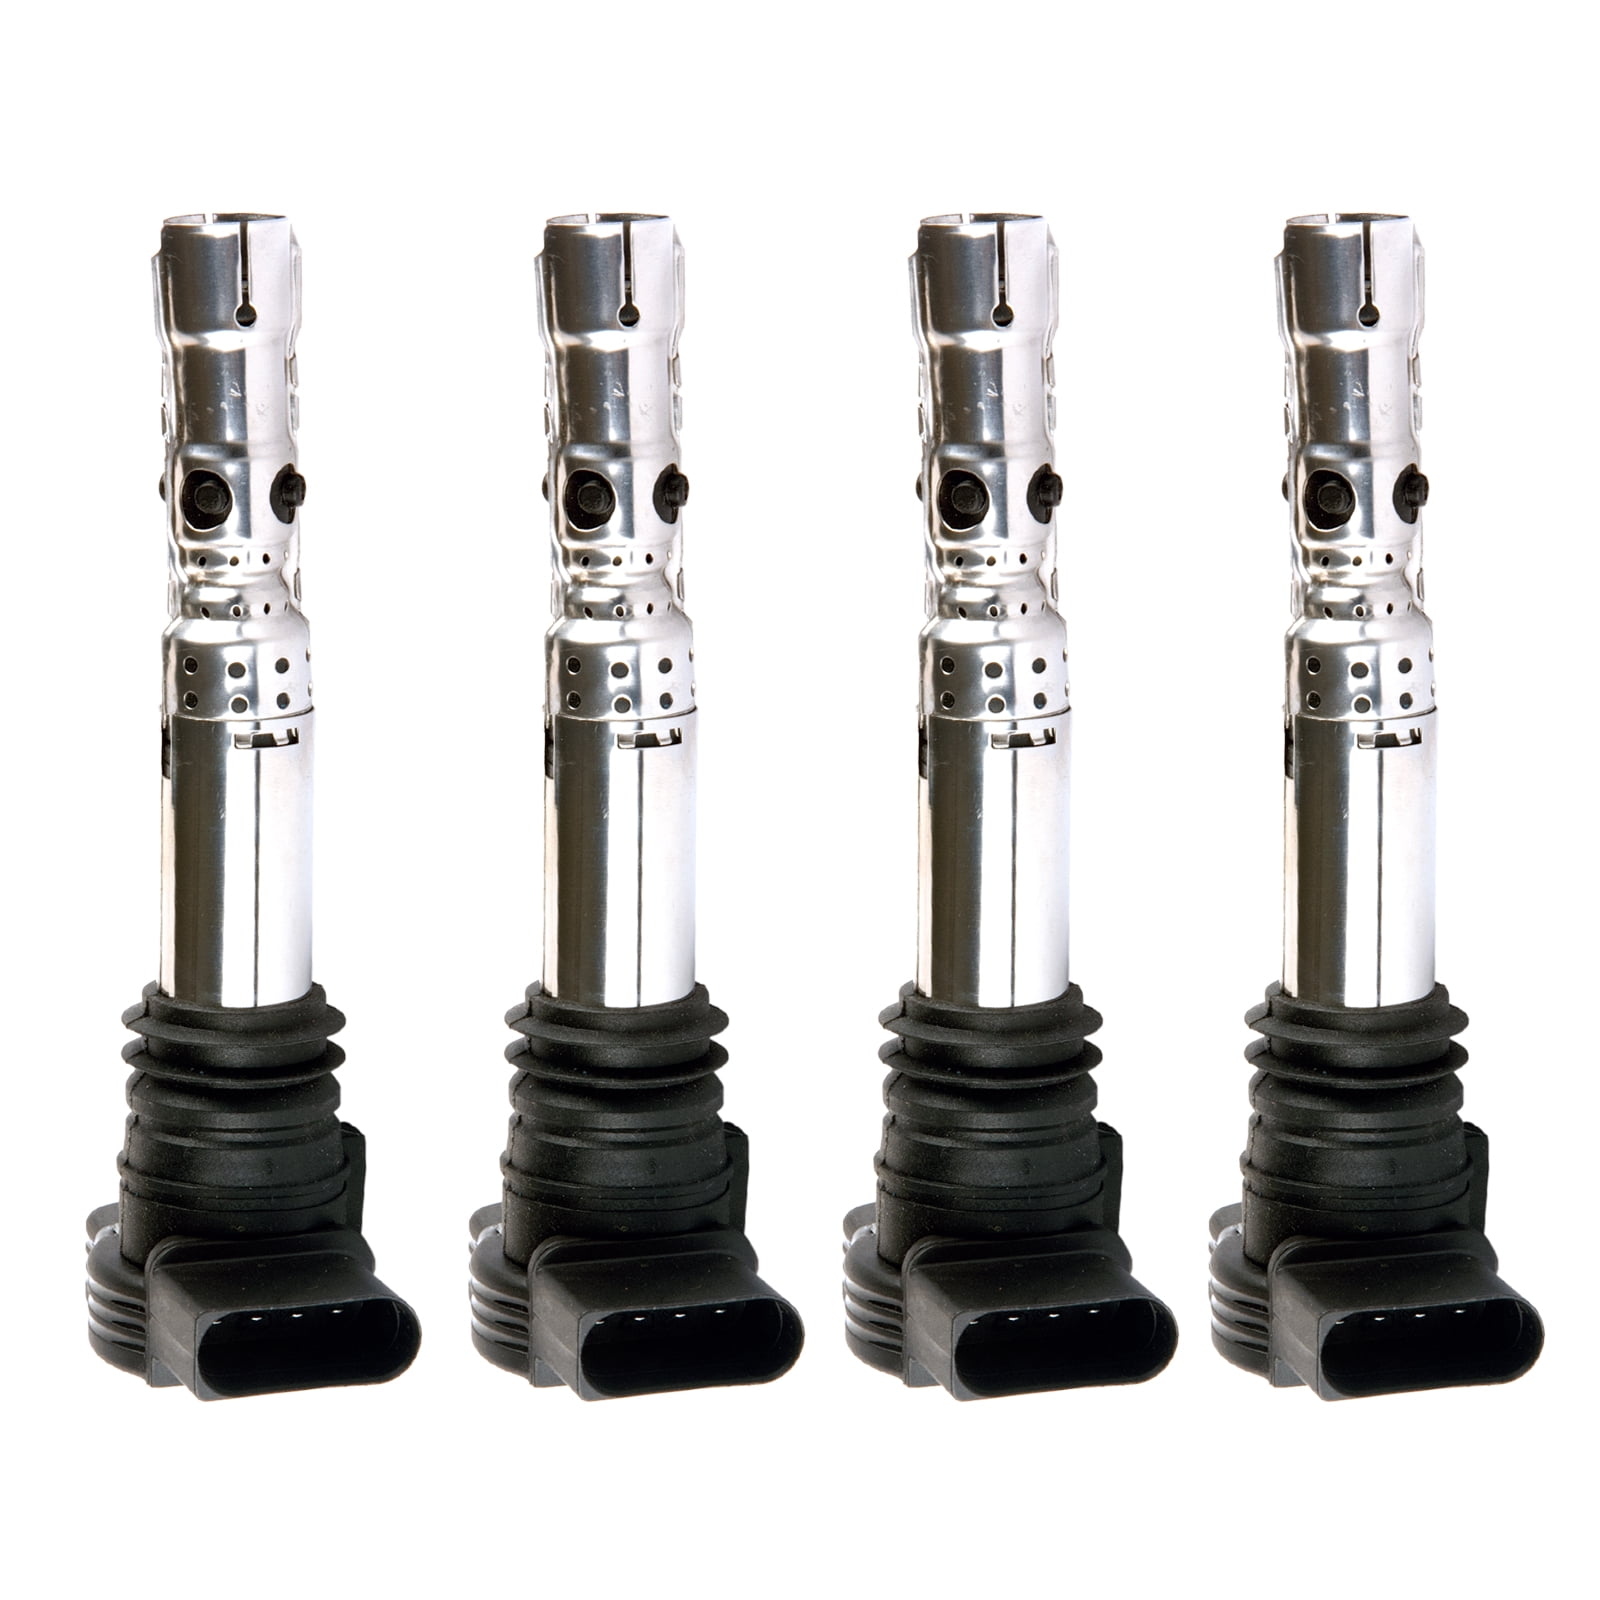 4 x Brand New Ignition Coils for Audi A4  1.8L 2.0L & 3.0L 4 & 6 Cylinder Eng.